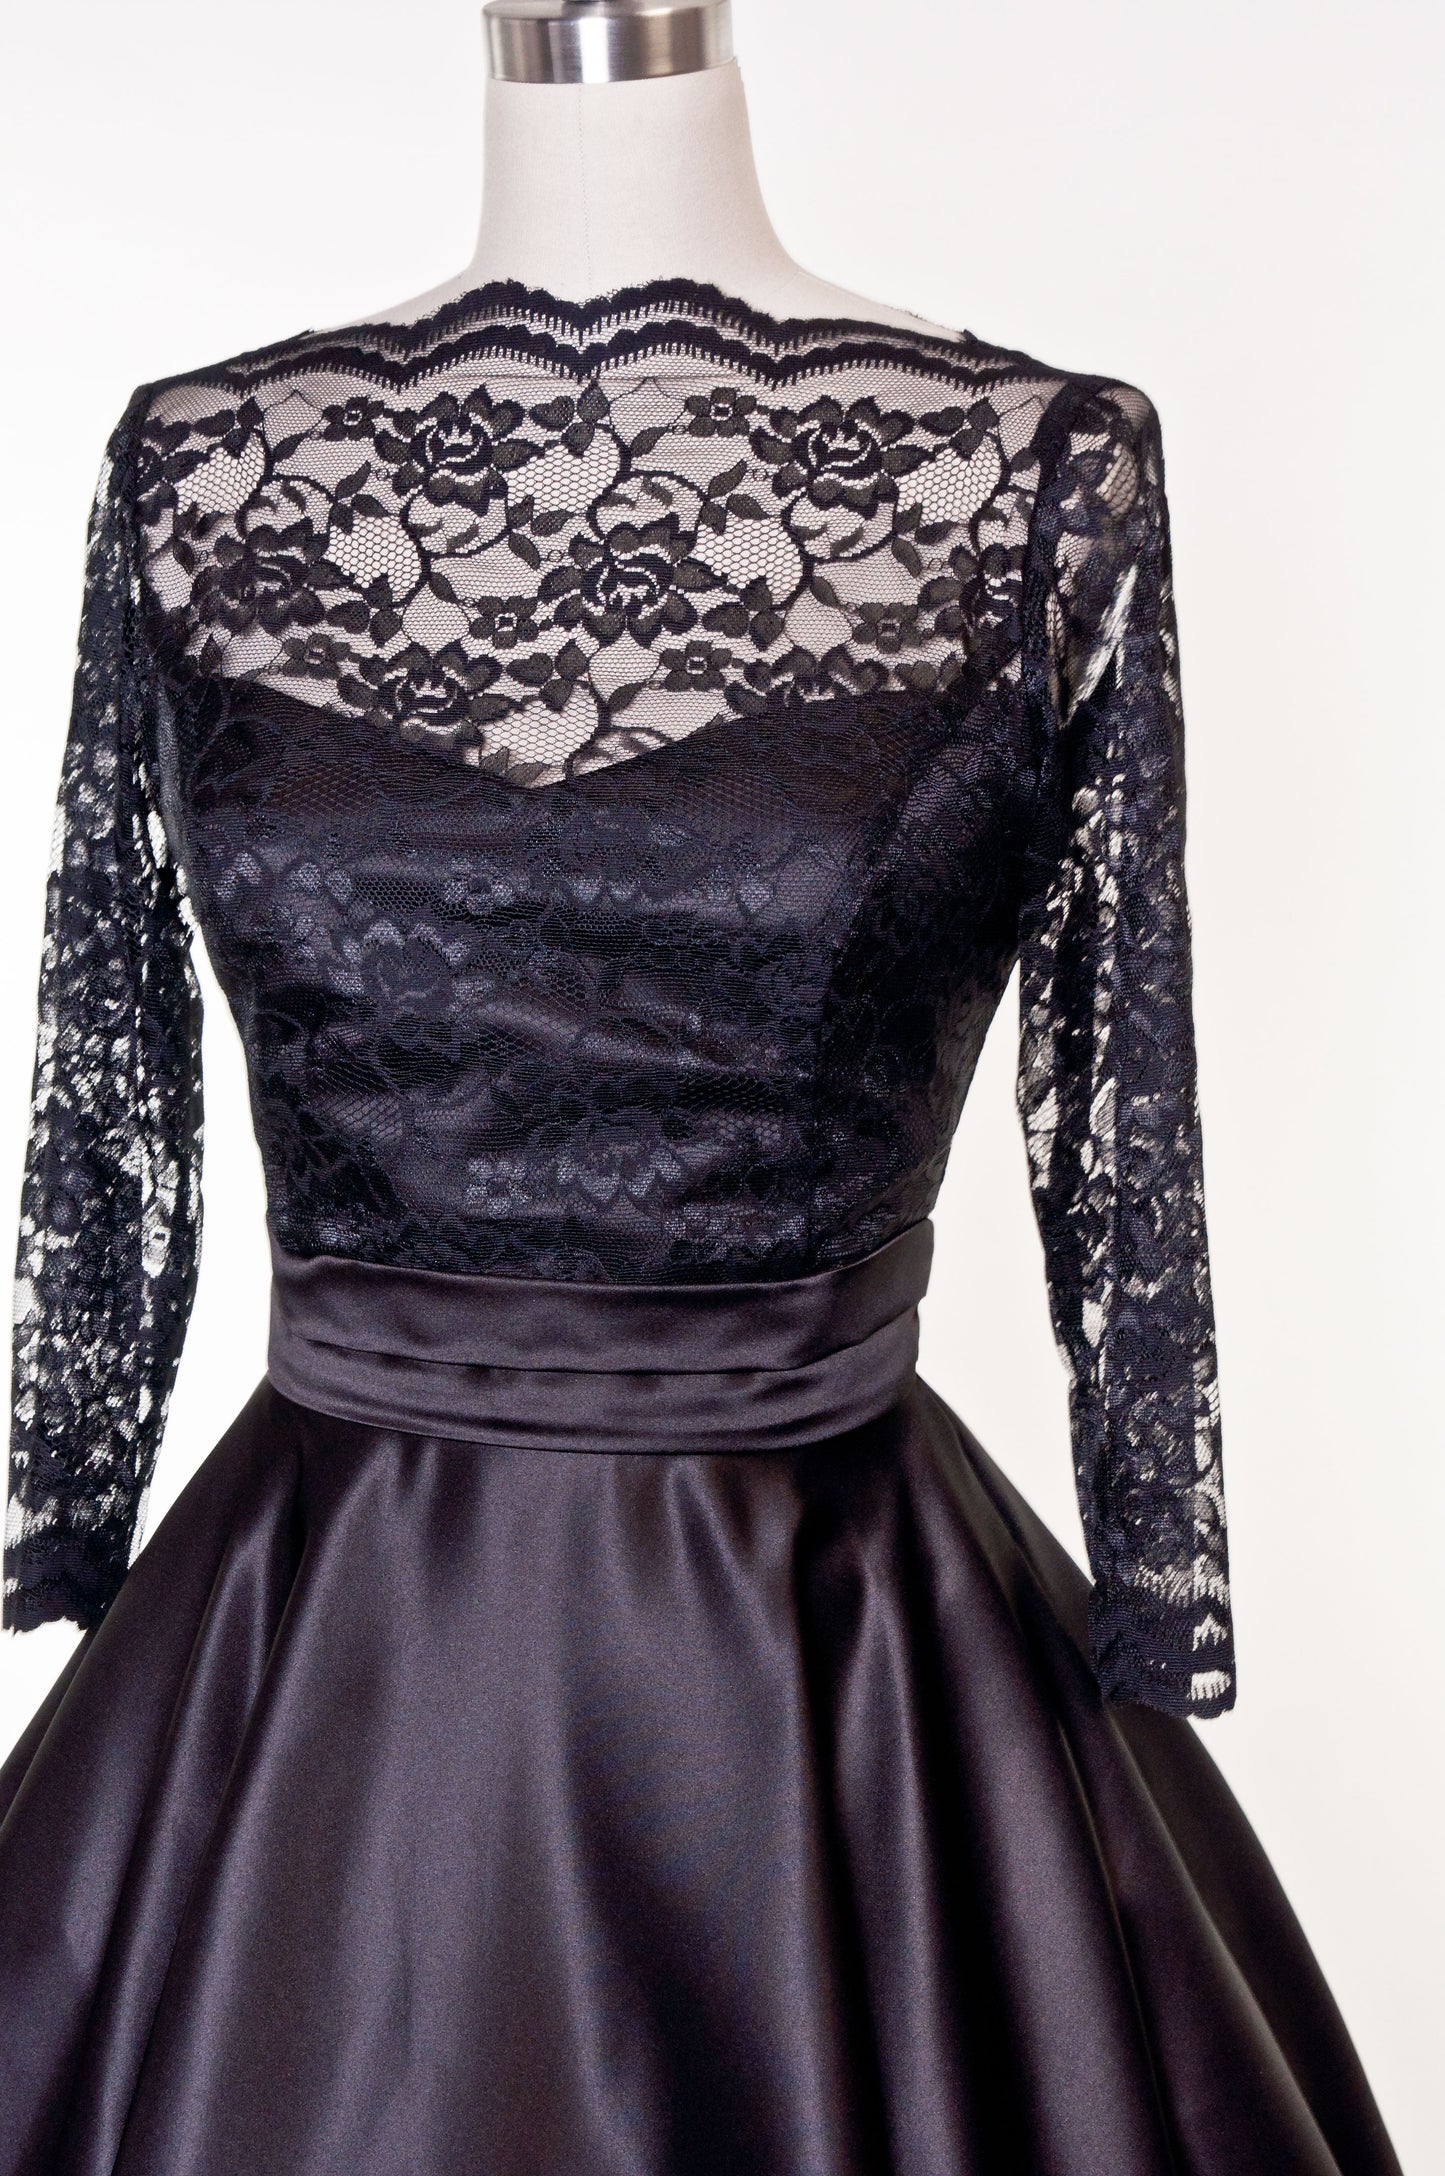 Collette Dress - Black Satin and Lace